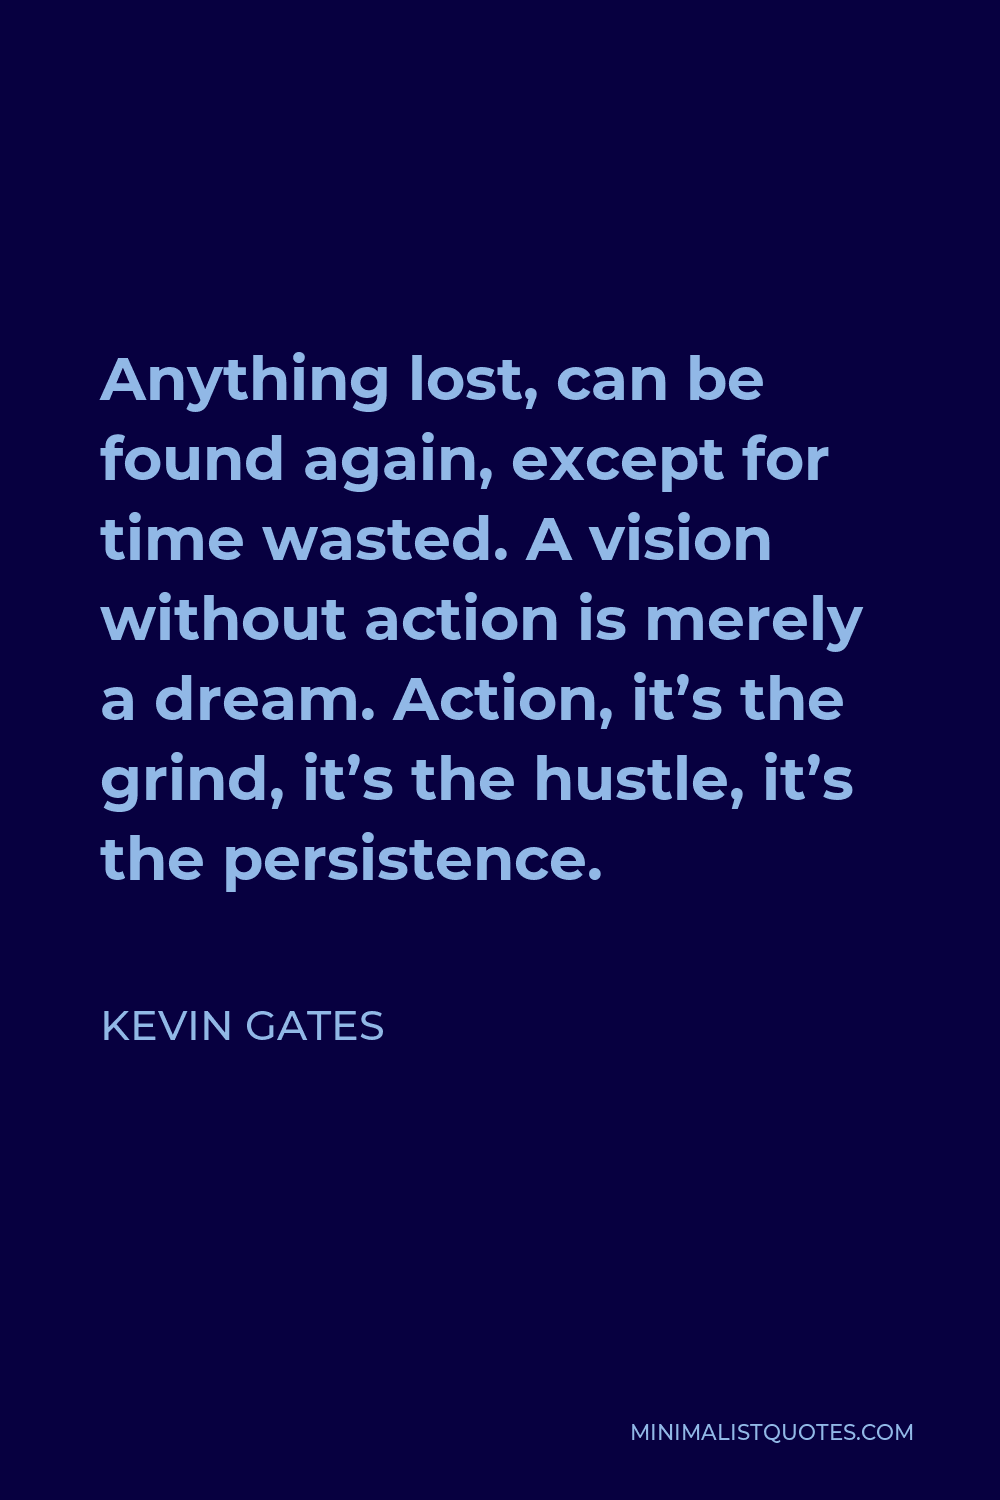 Kevin Gates Quote - Anything lost, can be found again, except for time wasted. A vision without action is merely a dream. Action, it’s the grind, it’s the hustle, it’s the persistence.